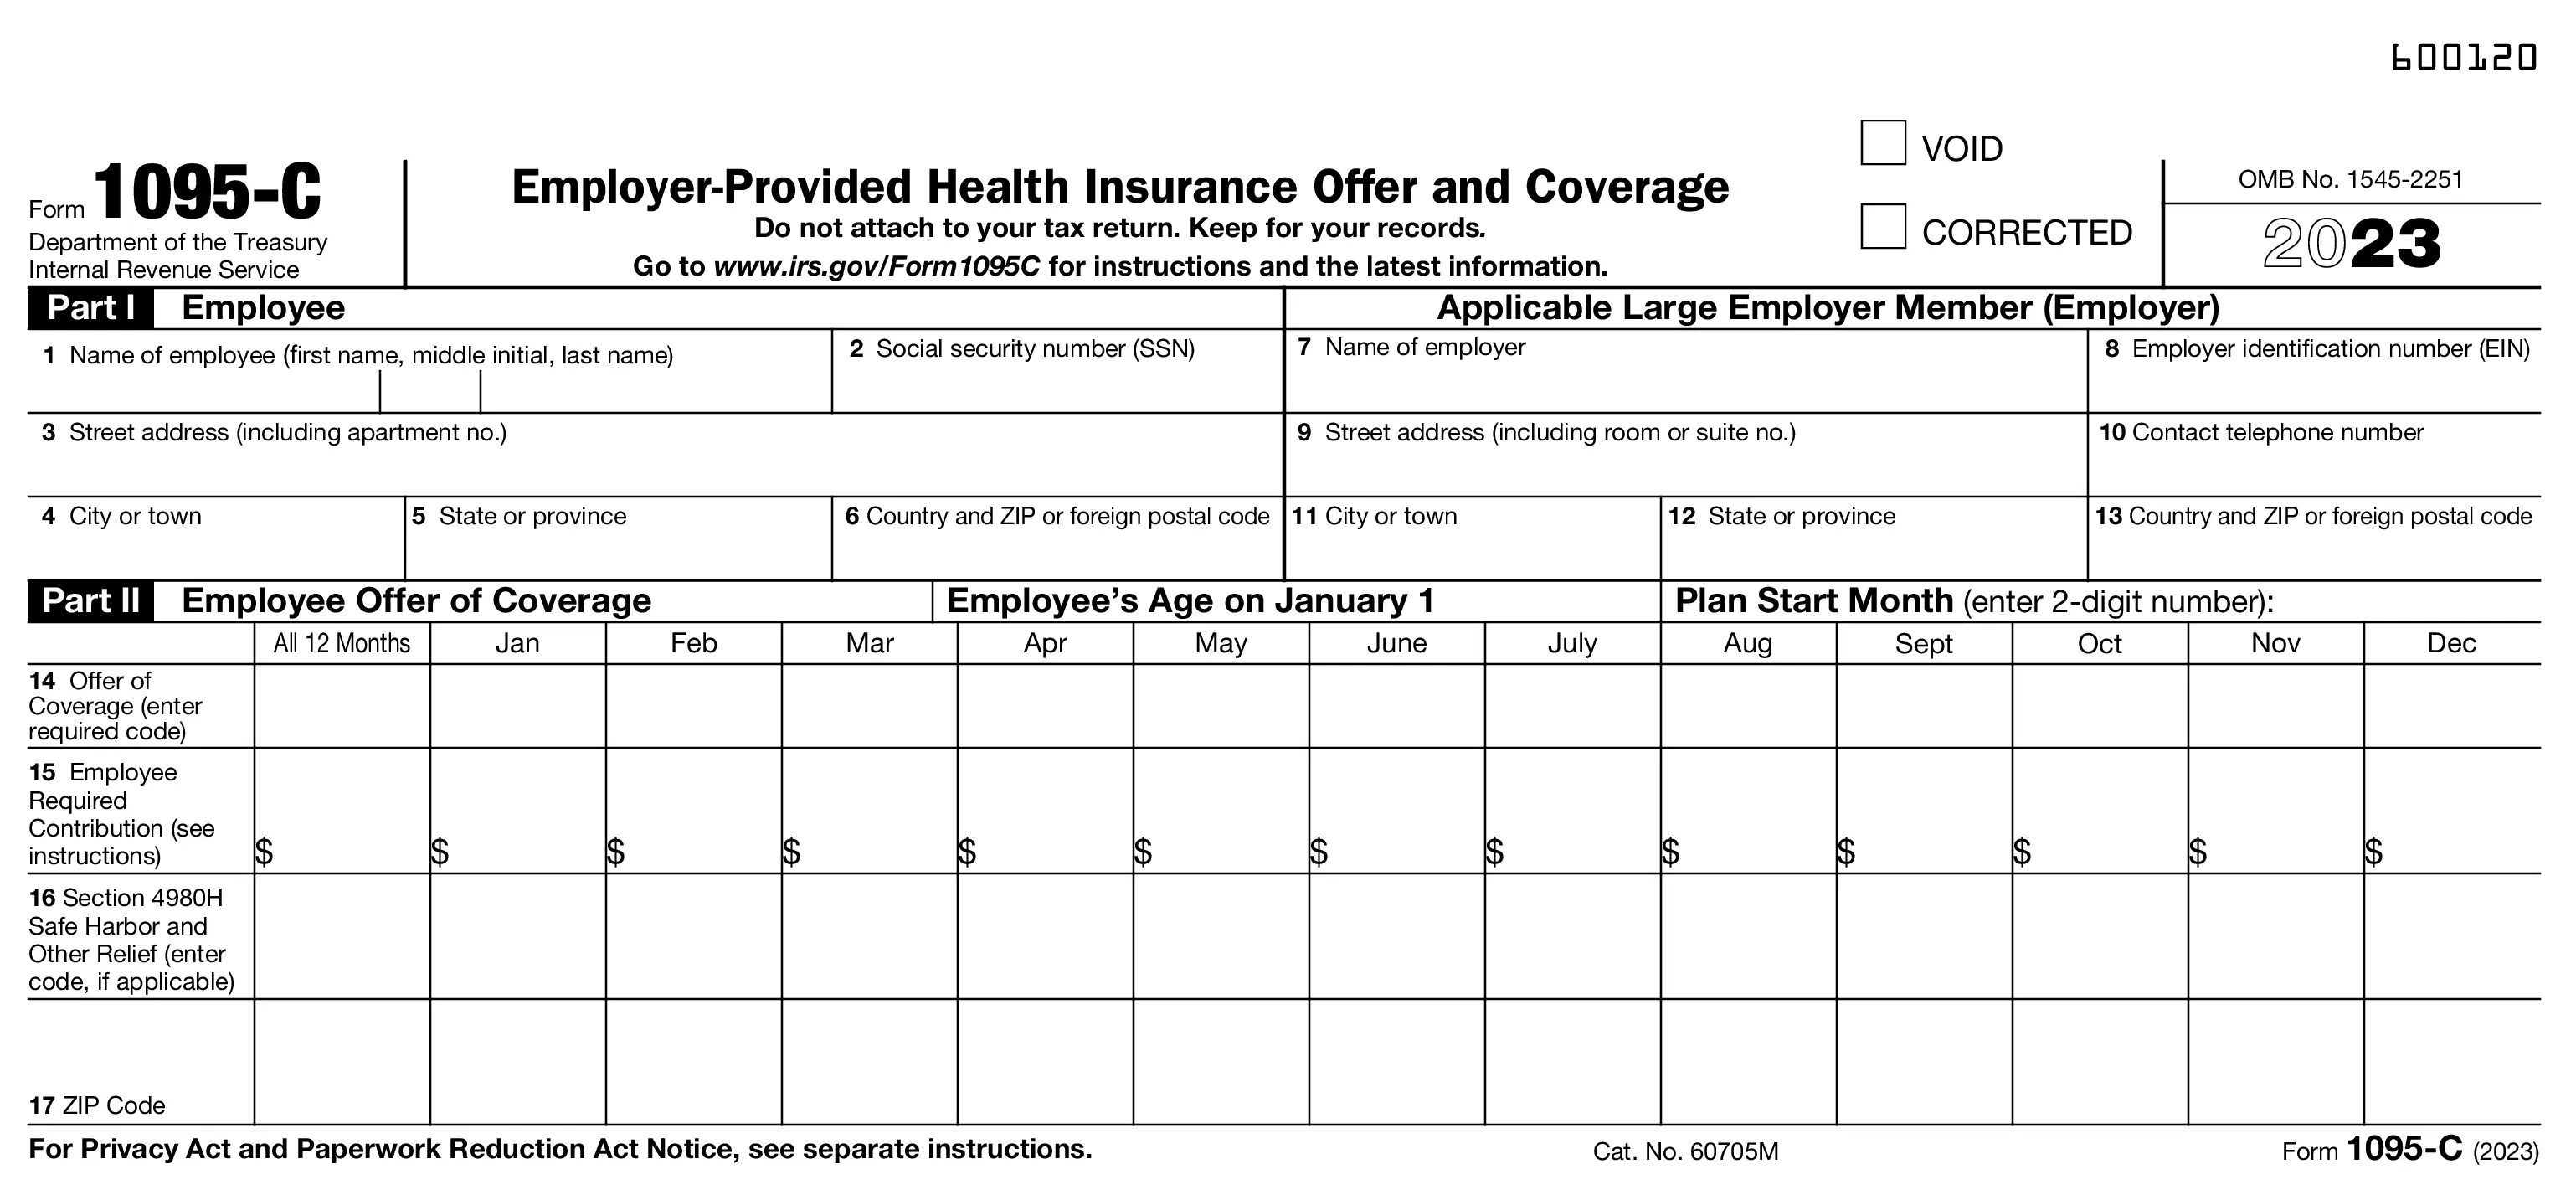 ACA Reporting Requirements under Section 6056